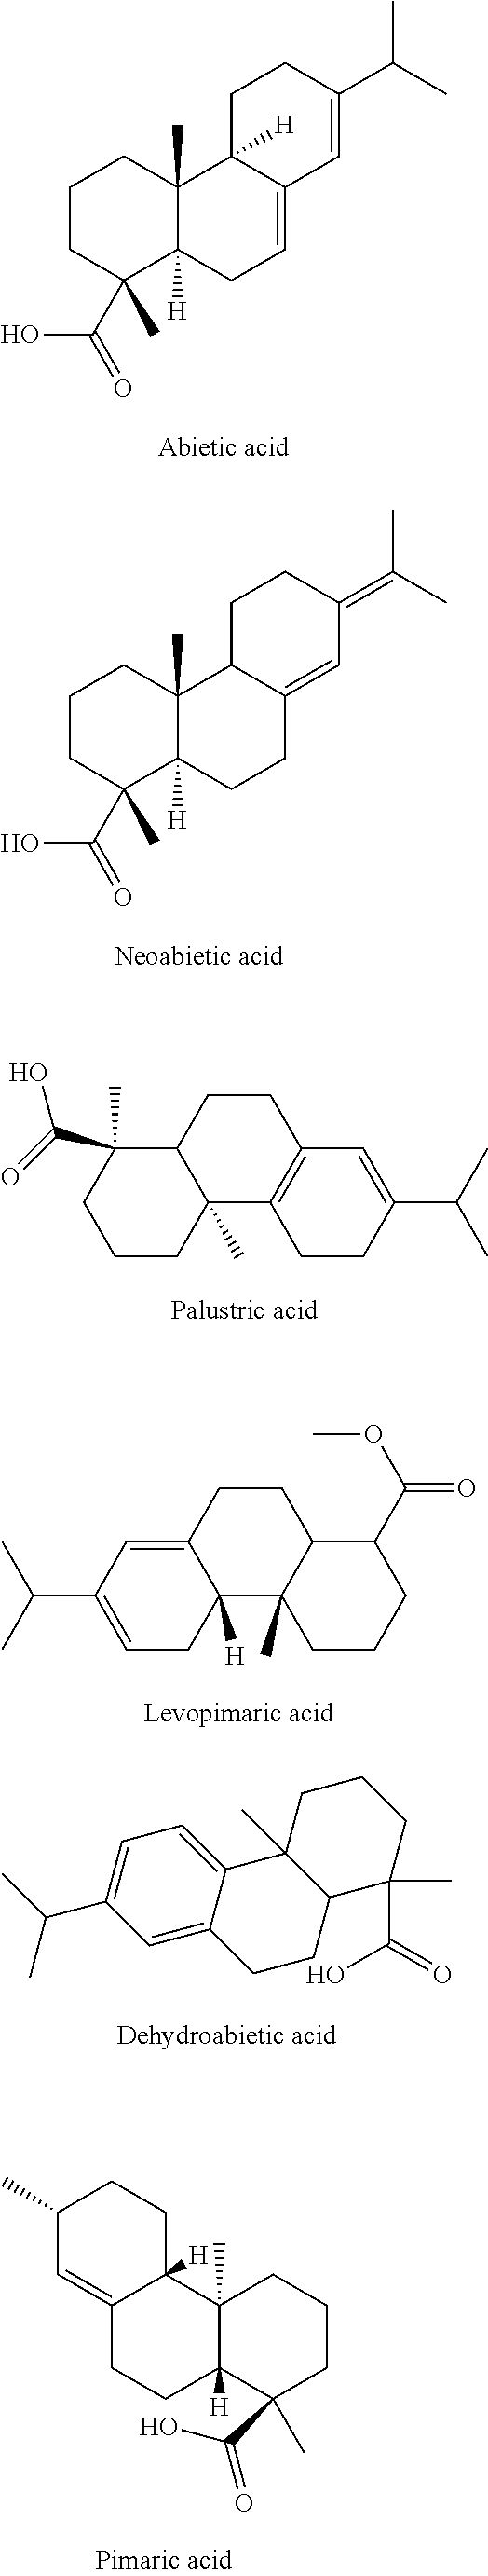 Aqueous inkjet pigment dispersion, method for producing same, and aqueous inkjet ink